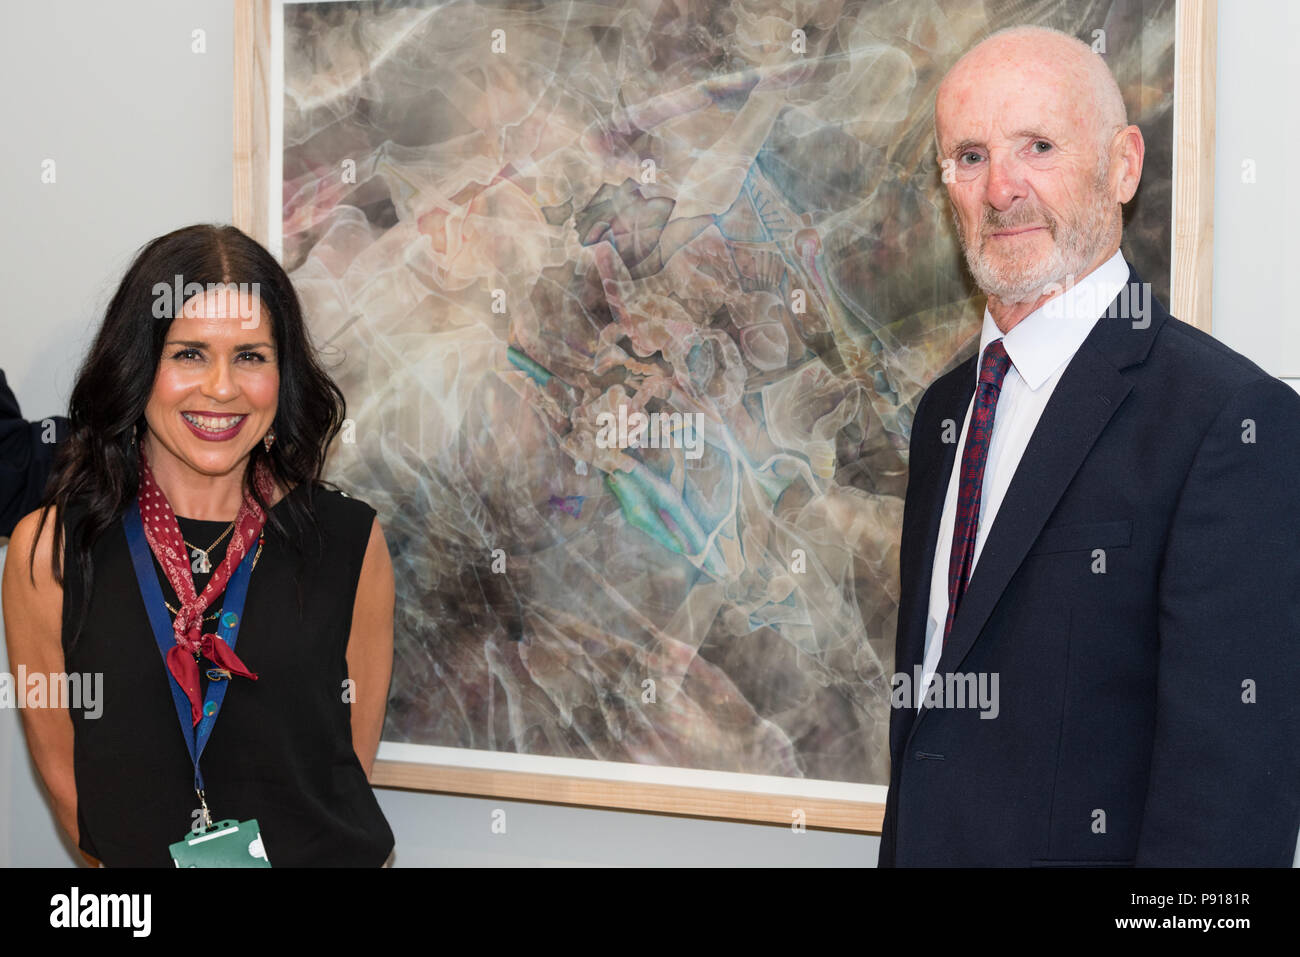 Oriel Môn, Llangefni, Gwynedd, Wales, UK. Friday 13 July 2018. The Opening night and prize awards for the centenary and fourth Kyffin Williams Drawing Prize exhibition, sponsored by ITV Cymru Wales and Rogers Jones auctioneers, was held at Oriel Môn, with Nicola Gibson (L) receiving the Student Prize for the ' Plan for a Bath House' on behalf of George Bolwell, from David Rogers Jones (L) . Credit: Michael Gibson/Alamy Live News Stock Photo